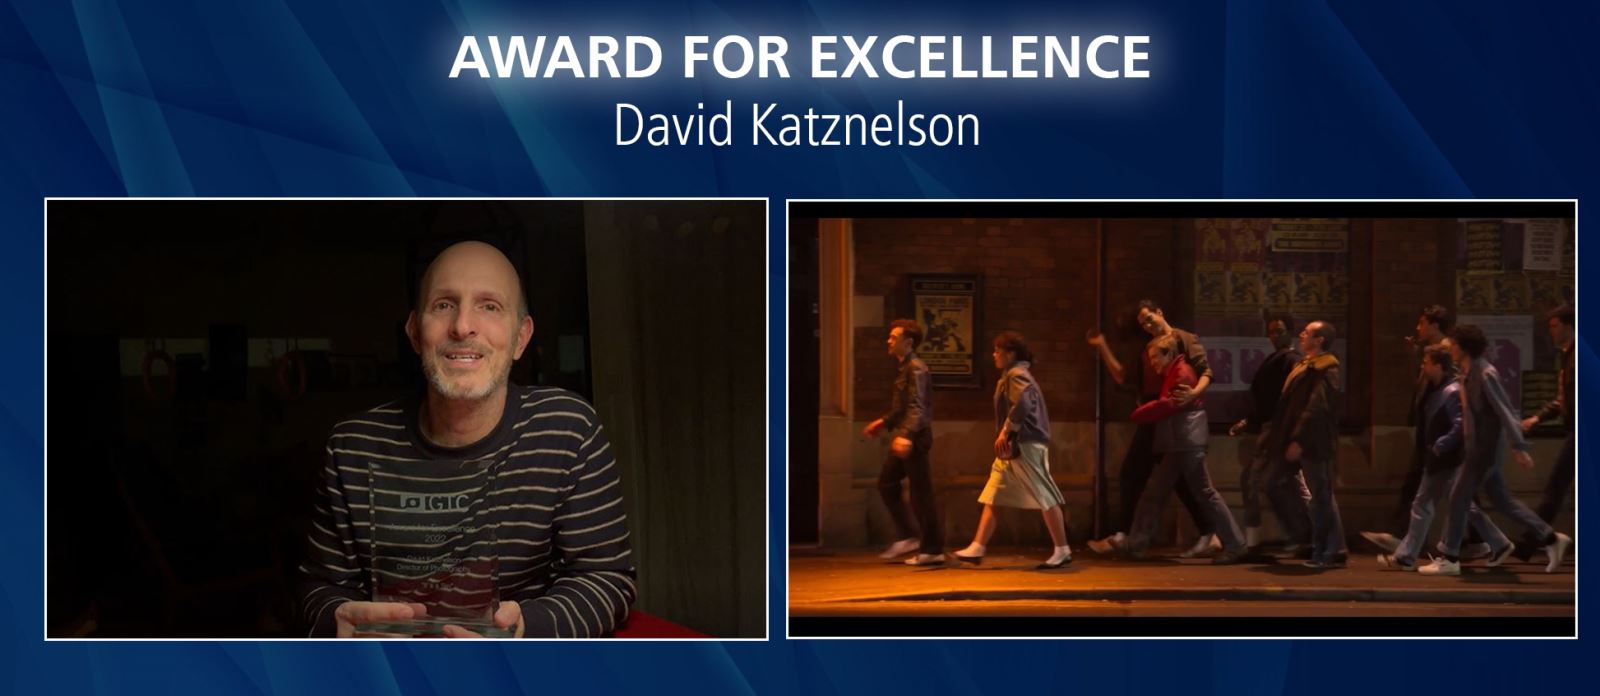 Award for Excellence - David Katznelson